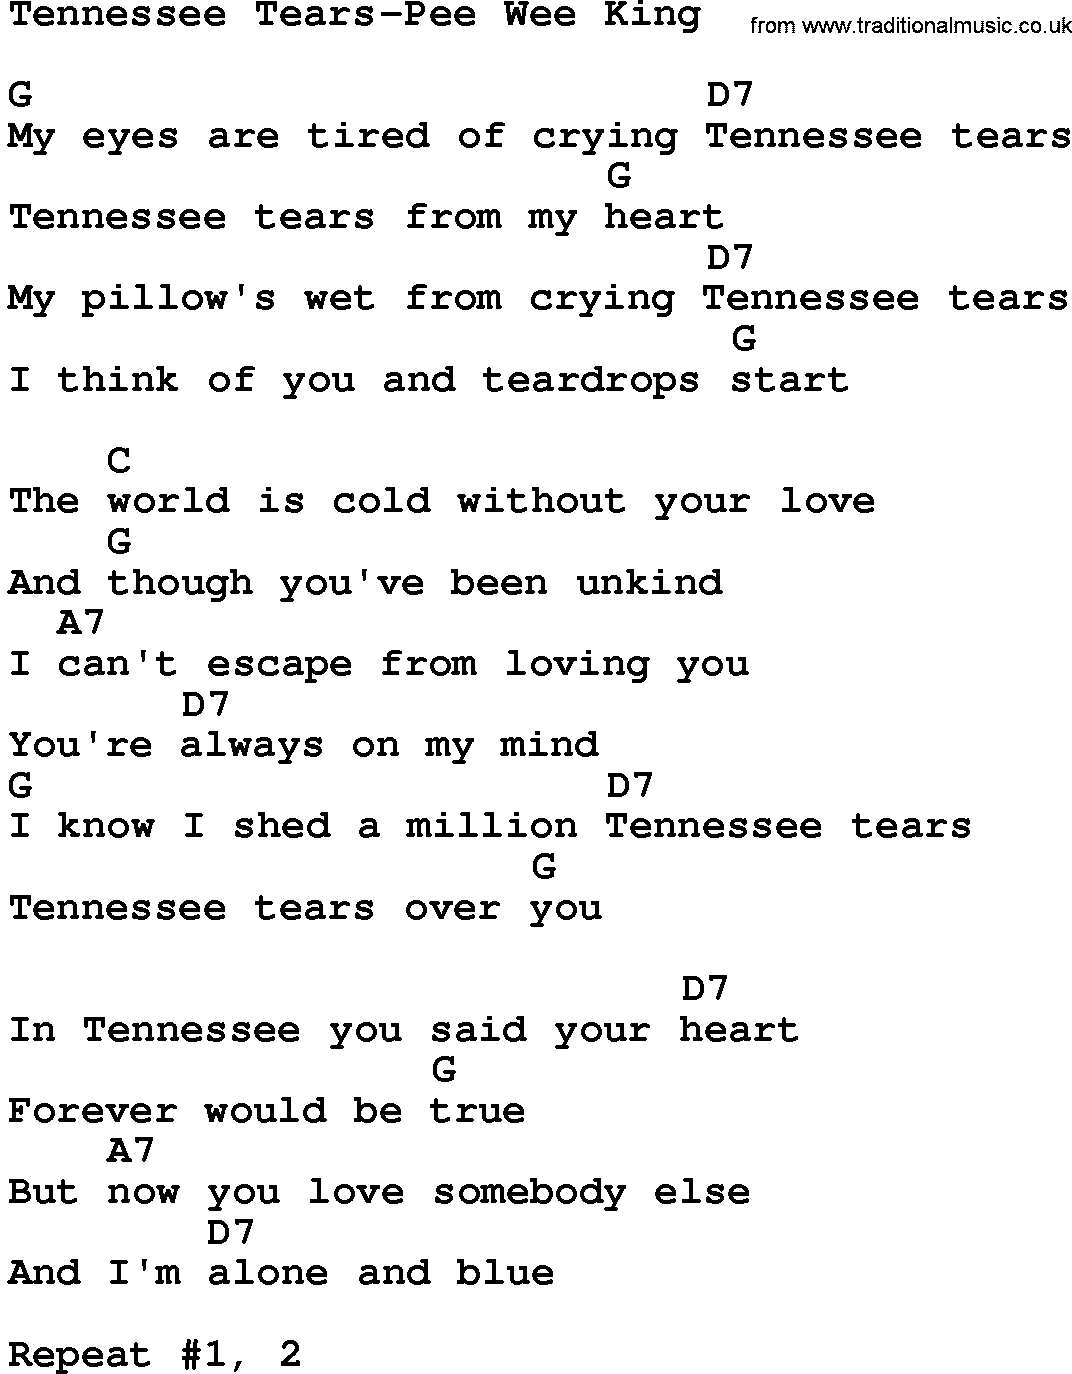 Country music song: Tennessee Tears-Pee Wee King lyrics and chords